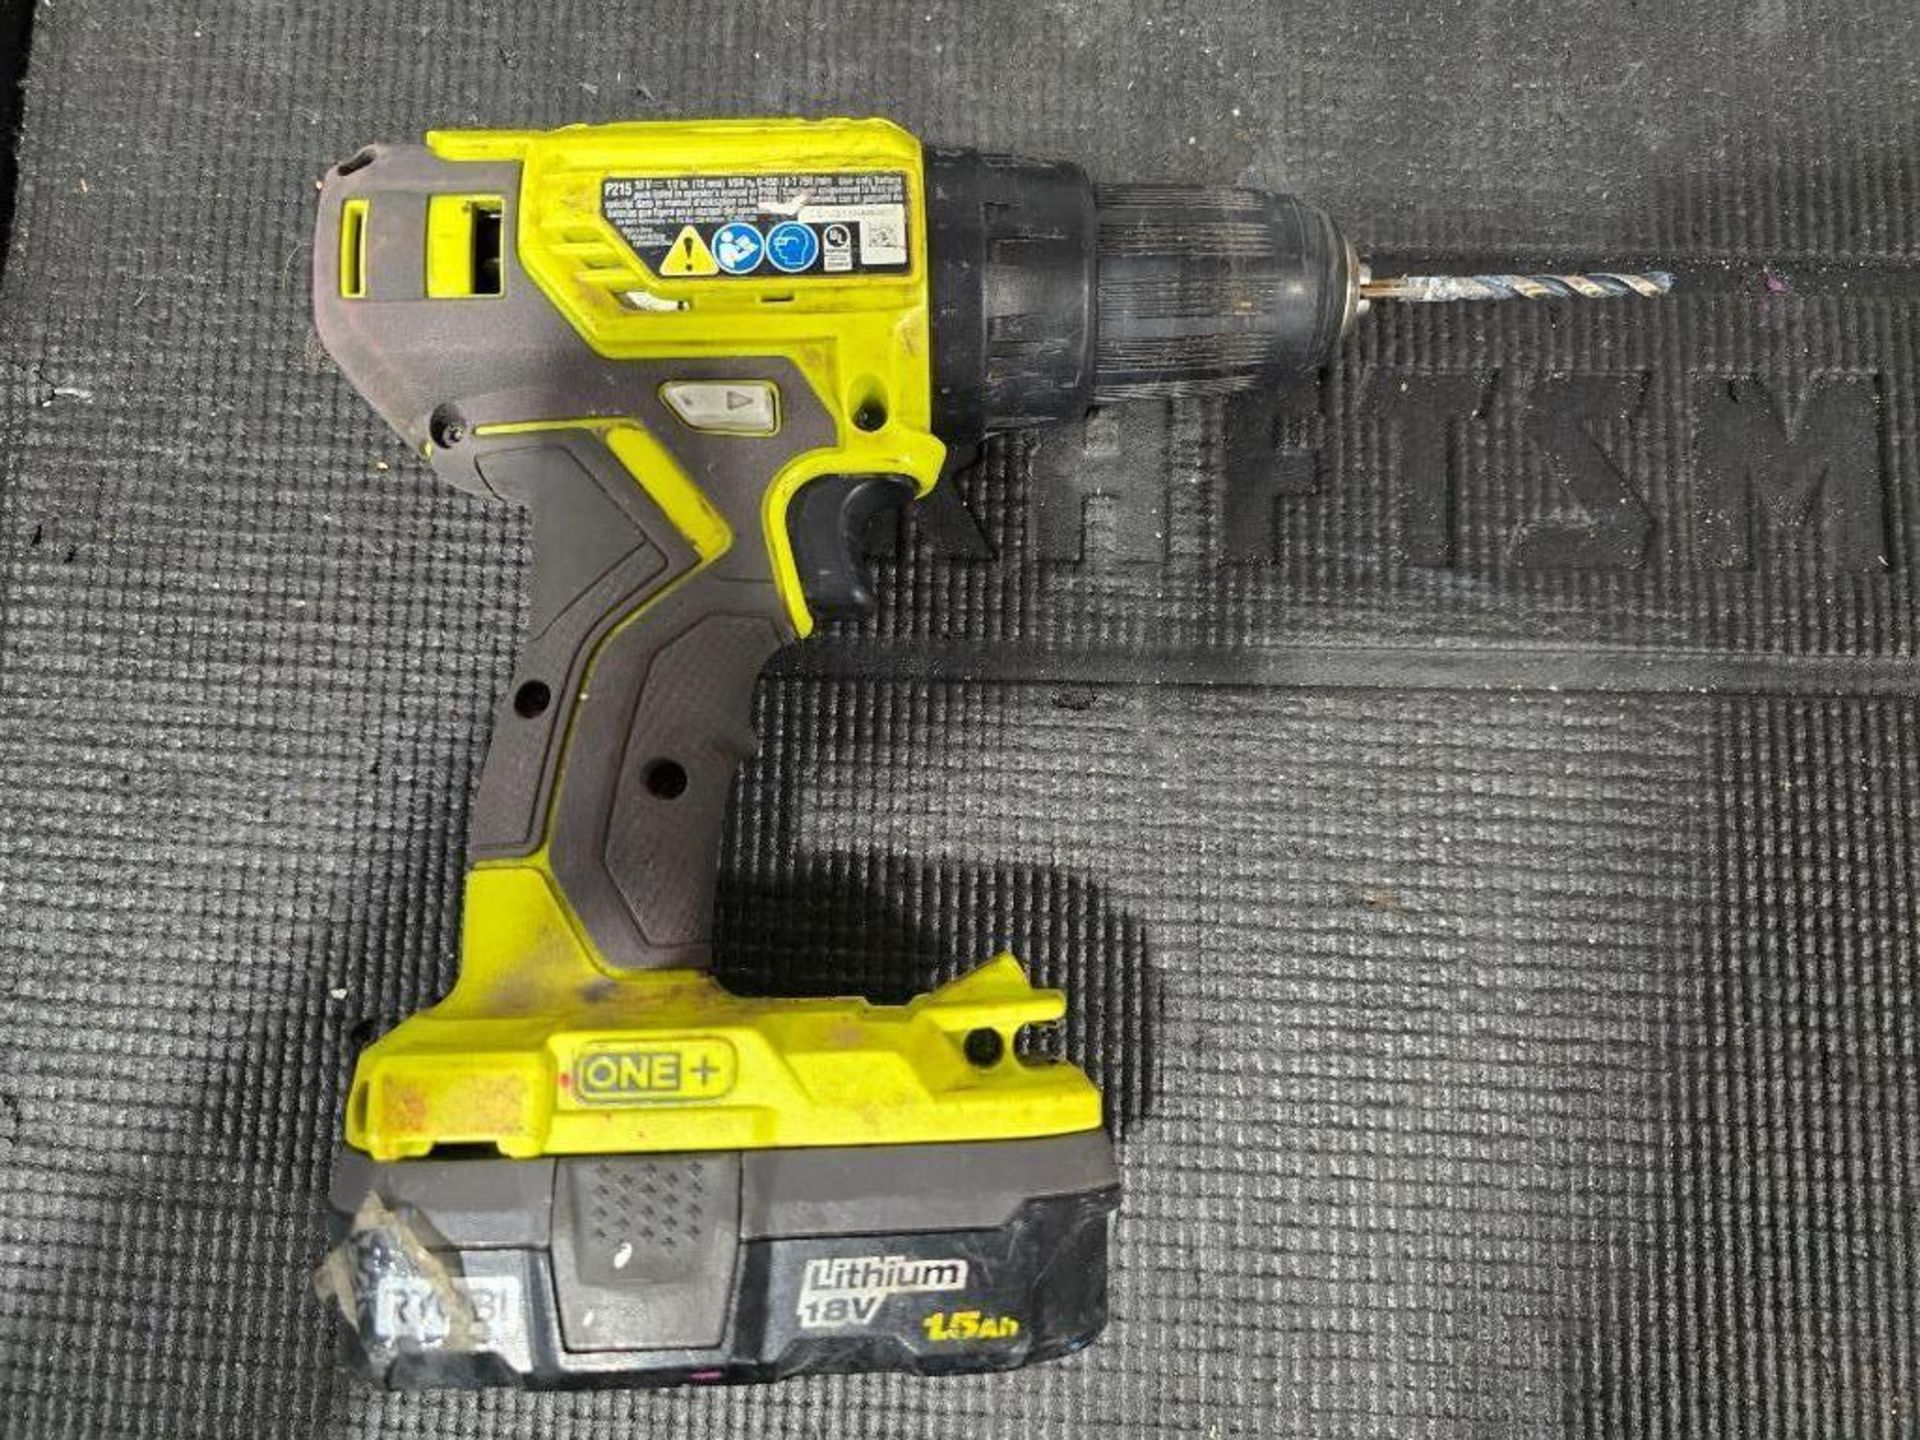 (2) Ryobi 18V Battery Powered Screw Guns w/ Chargers & (3) Drill/Nut Driver Sets - Image 2 of 7